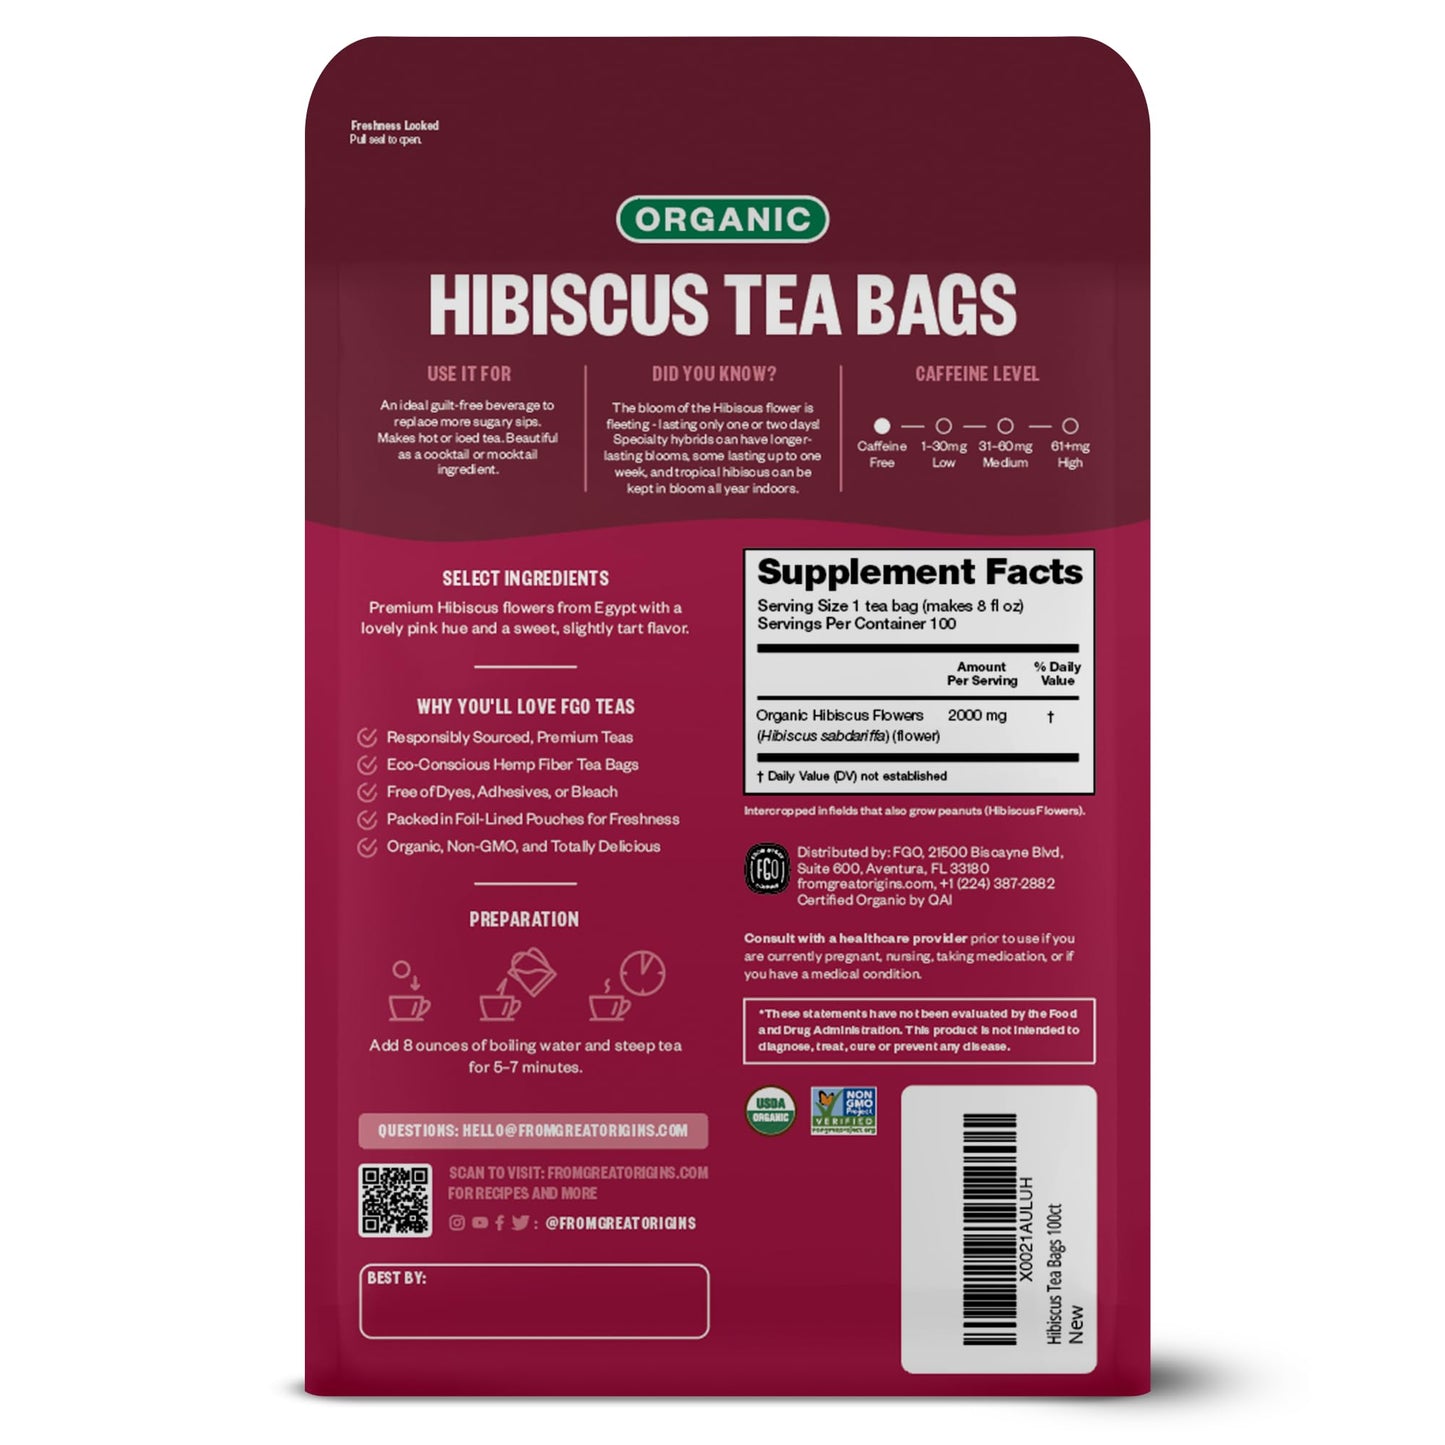 FGO Organic Hibiscus Tea, Eco-Conscious Tea Bags, 100 Count, Packaging May Vary (Pack of 1)